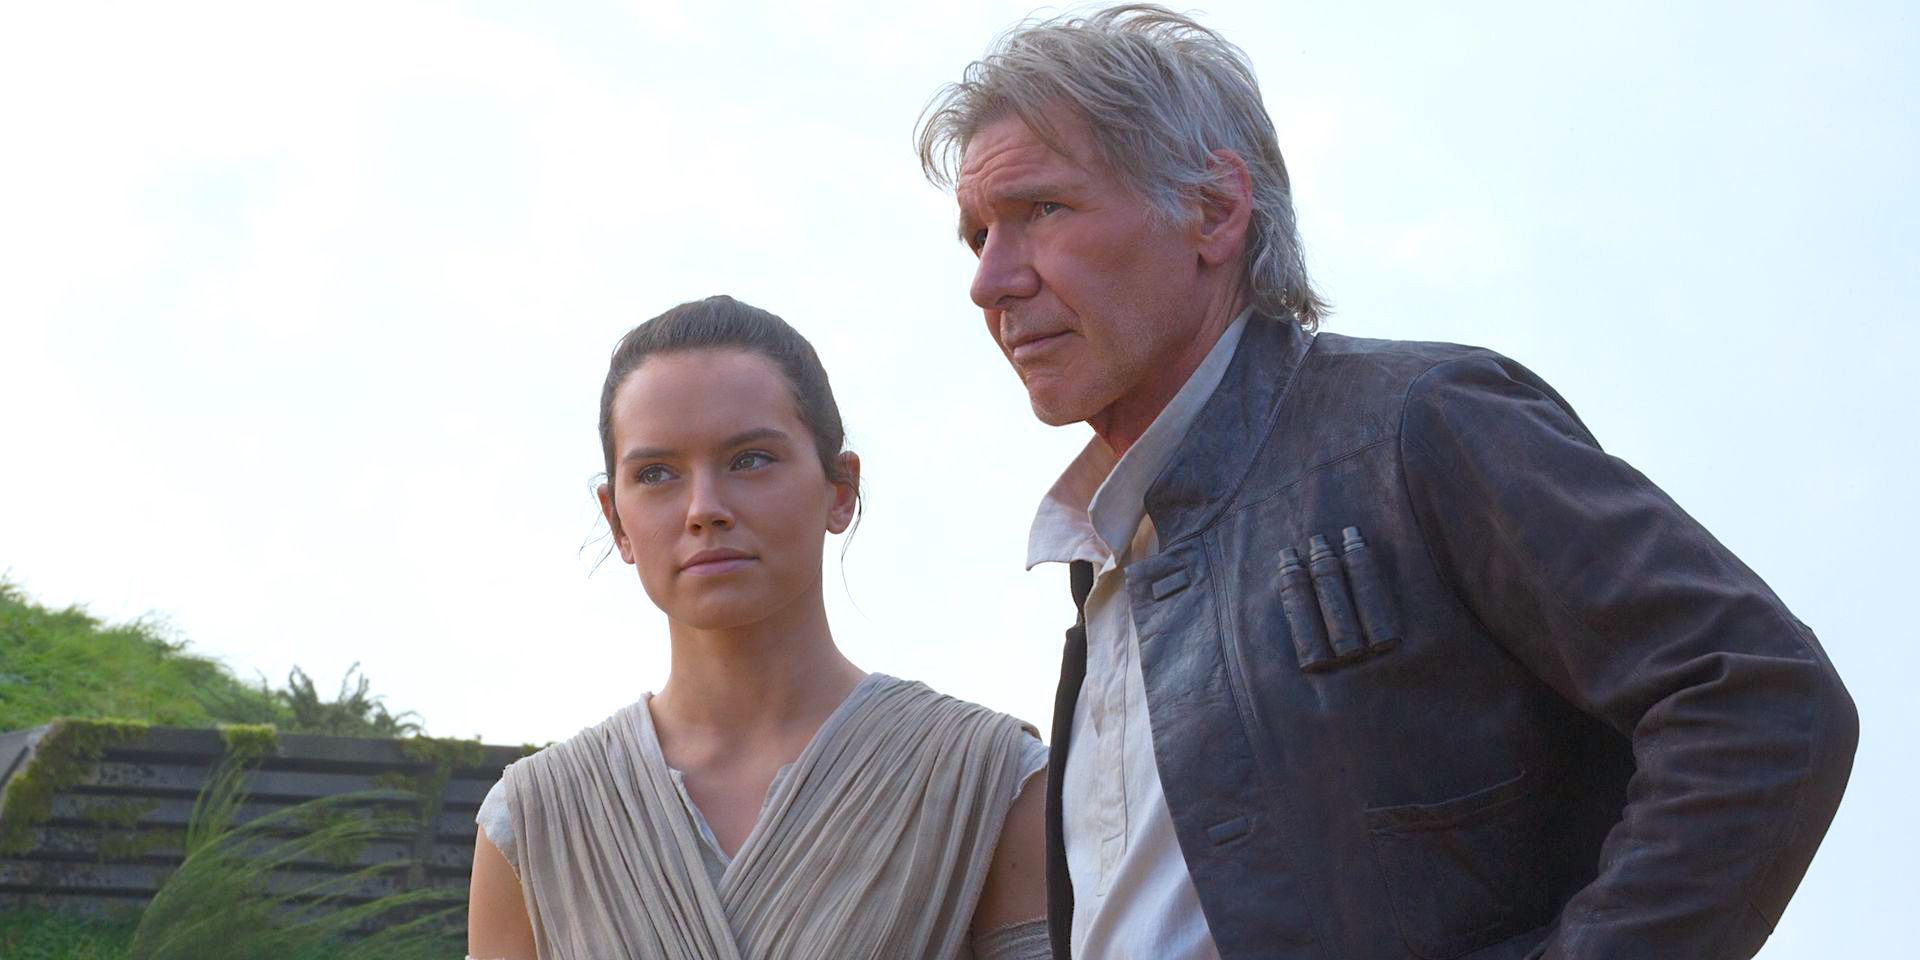 Rey and Han Solo standing by the Falcon in Star Wars The Force Awakens